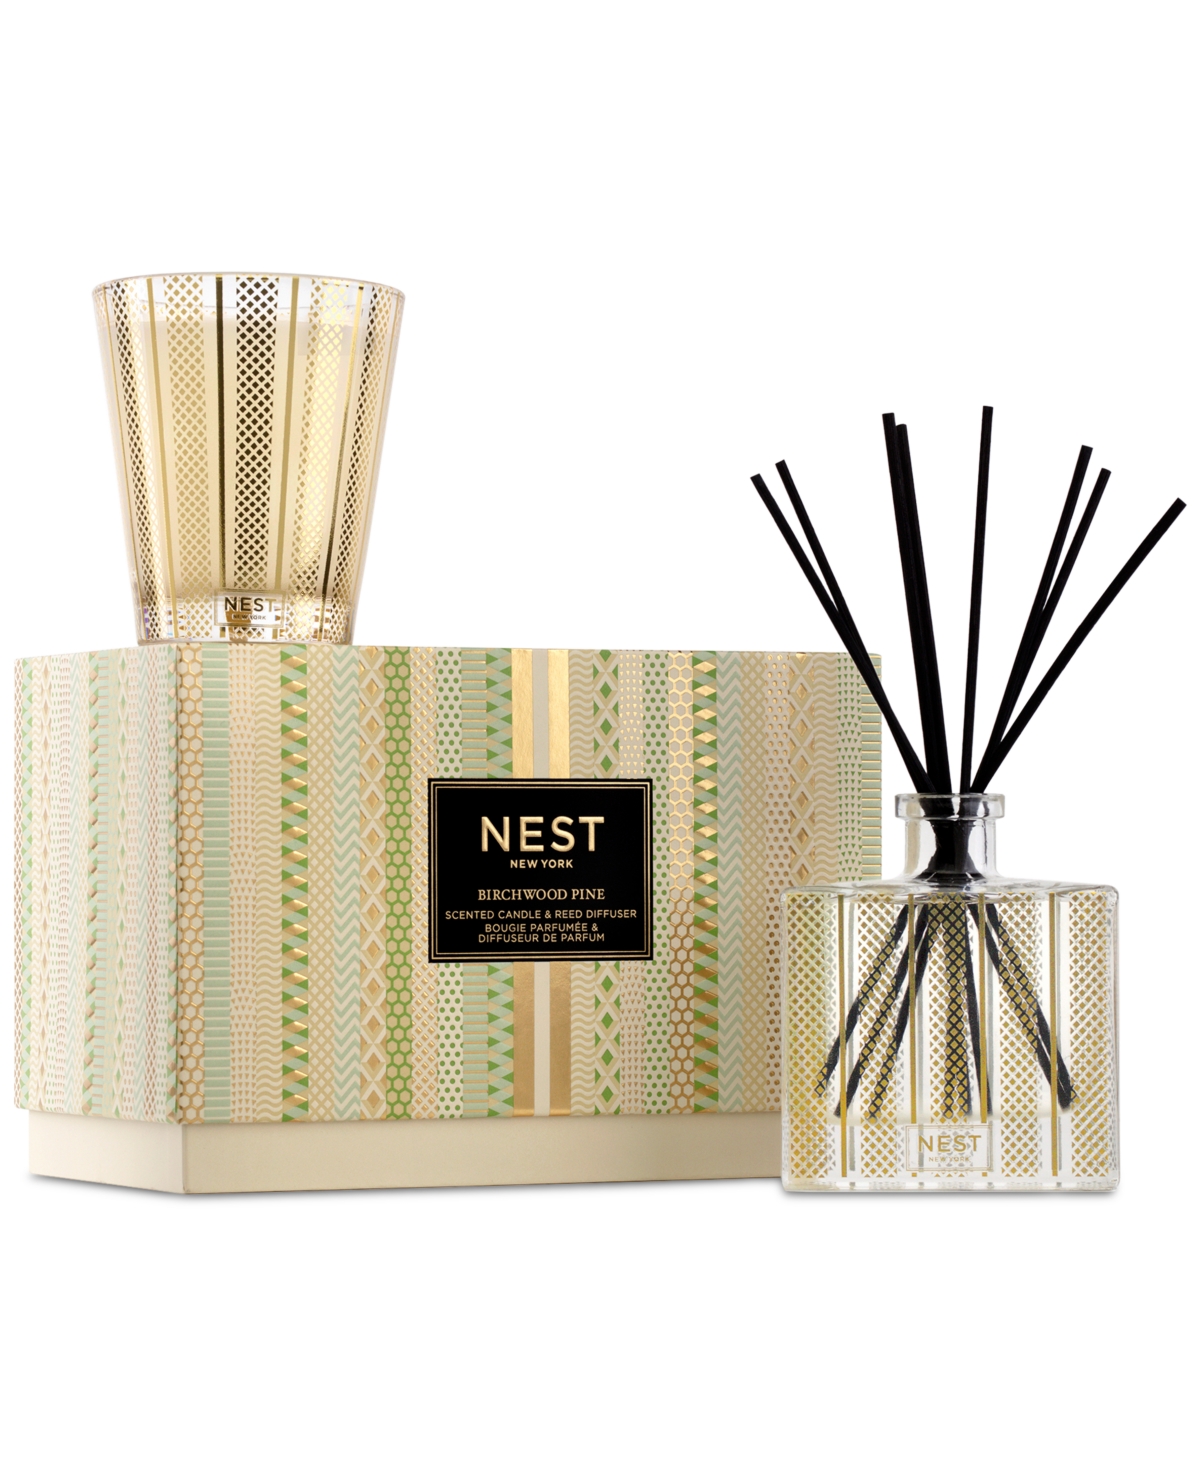 2-Pc. Birchwood Pine Candle & Reed Diffuser Gift Set